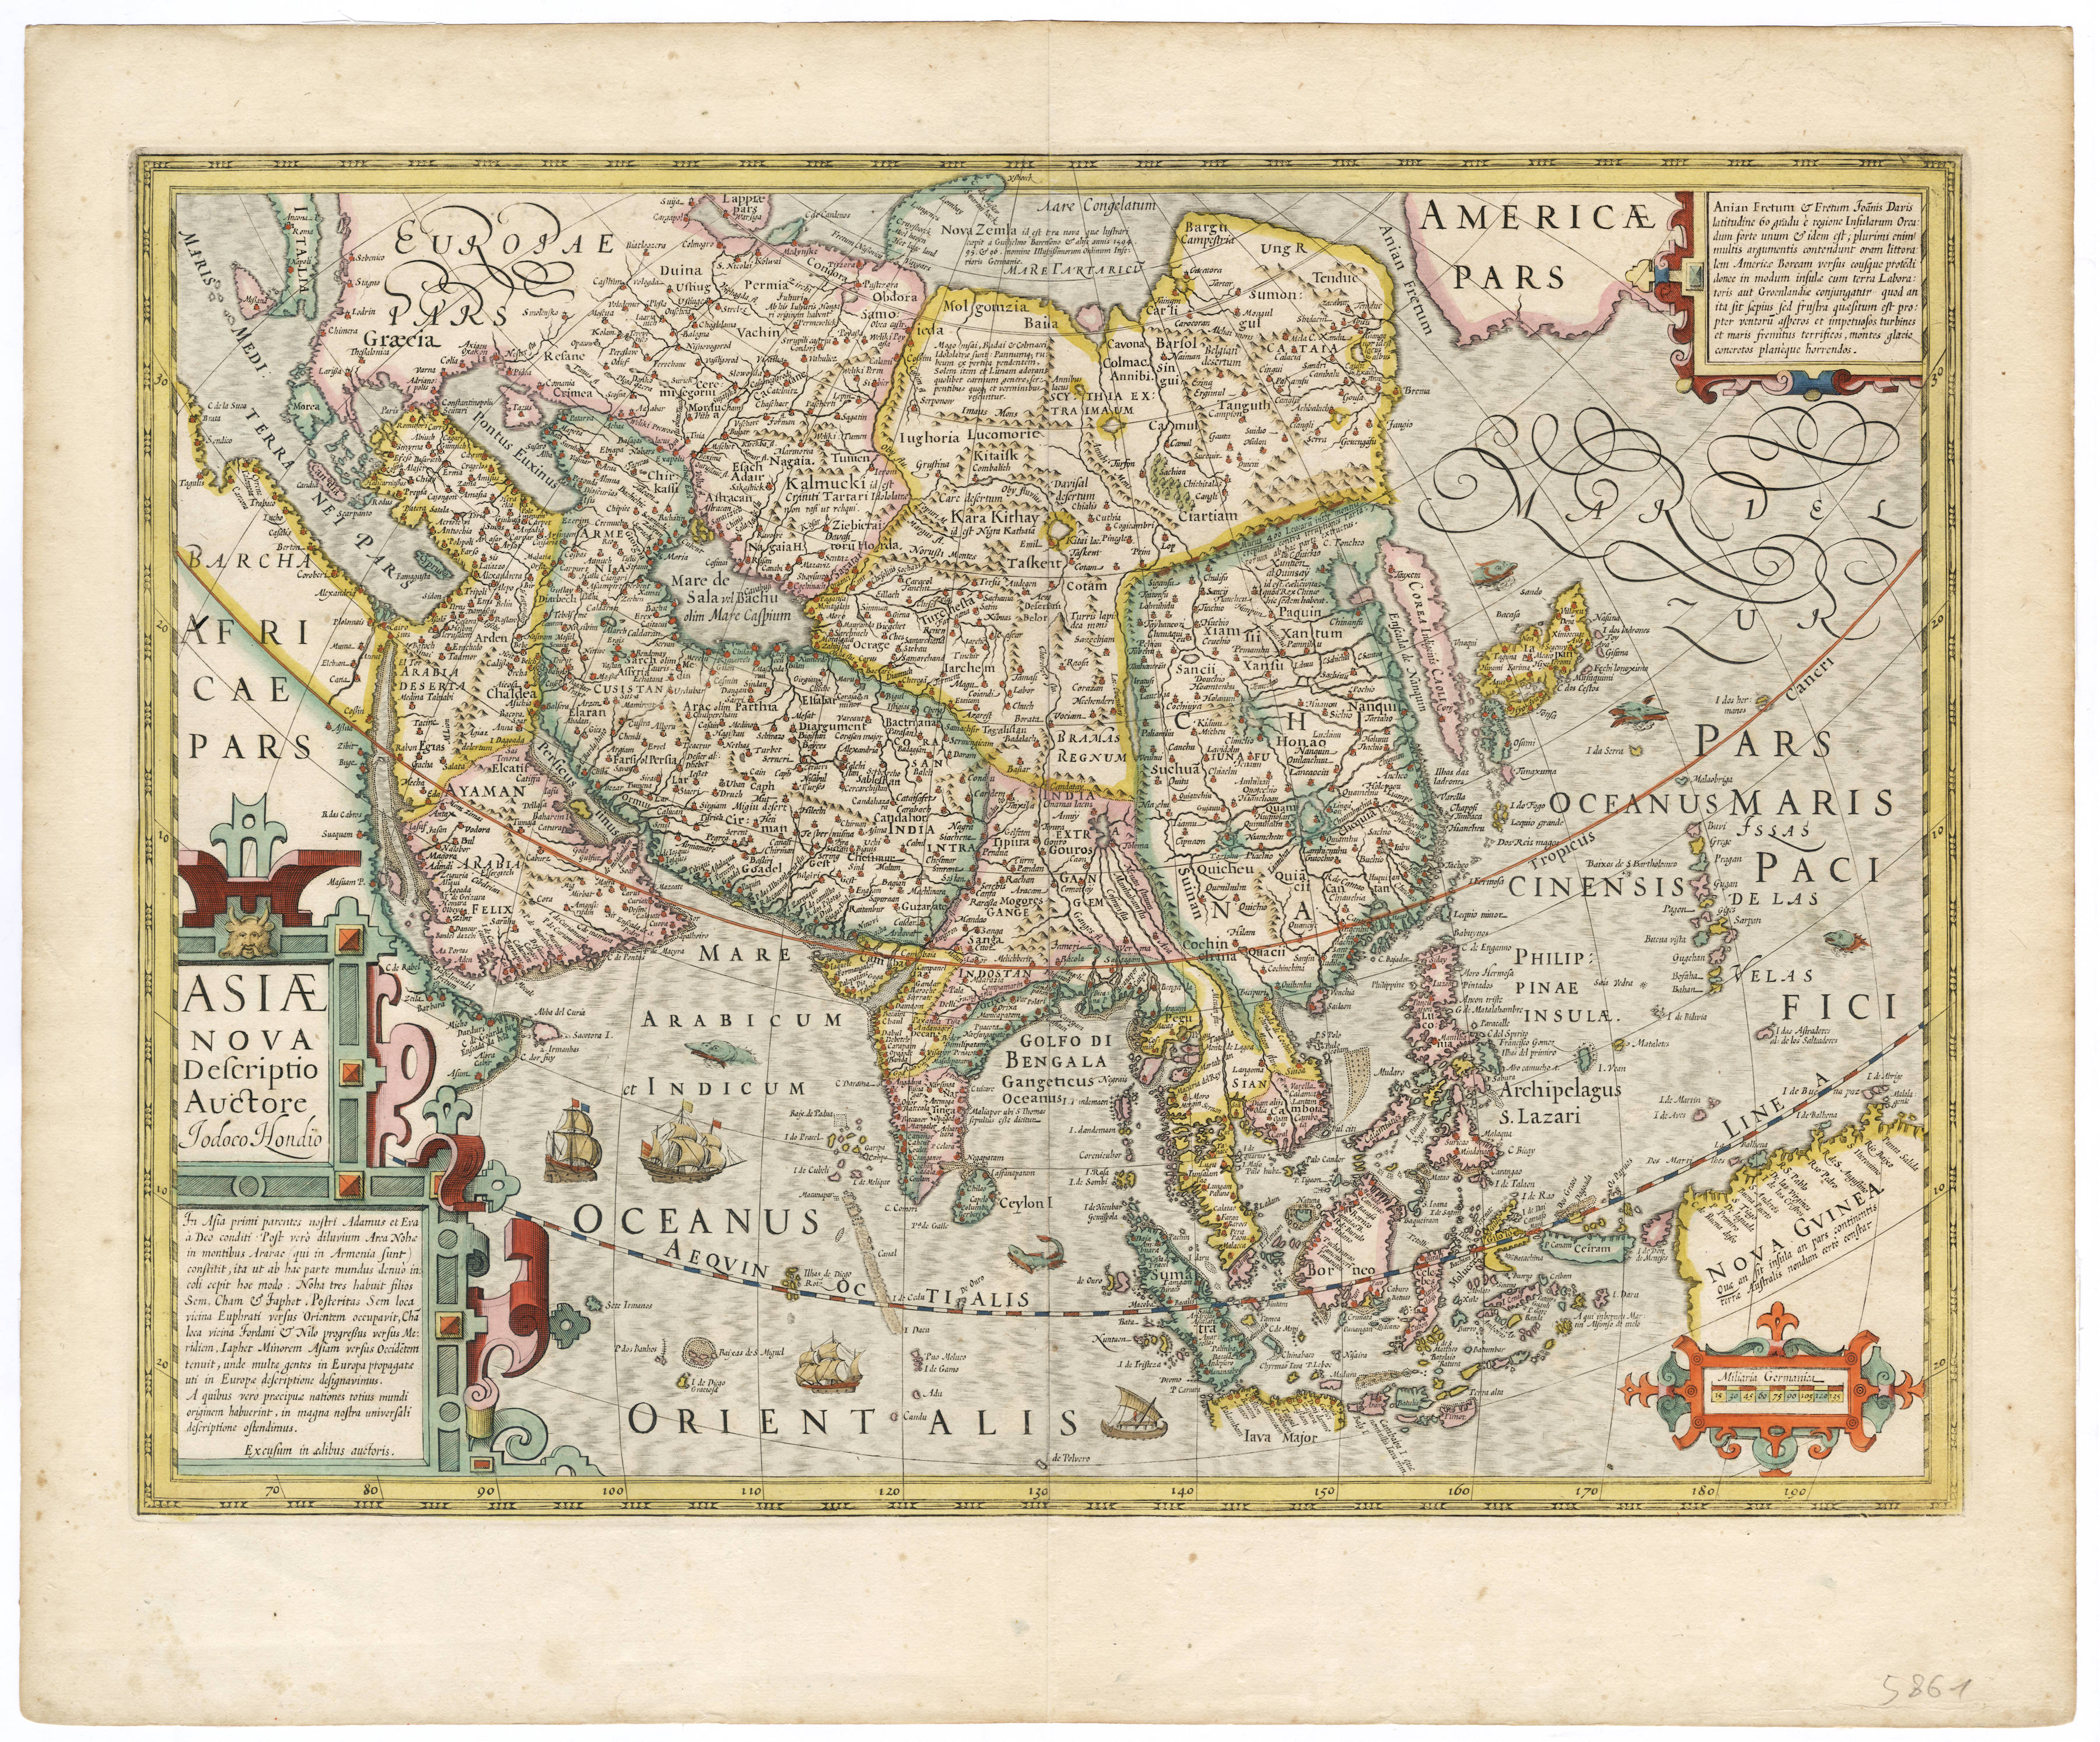 Antique map of Asia by Hondius